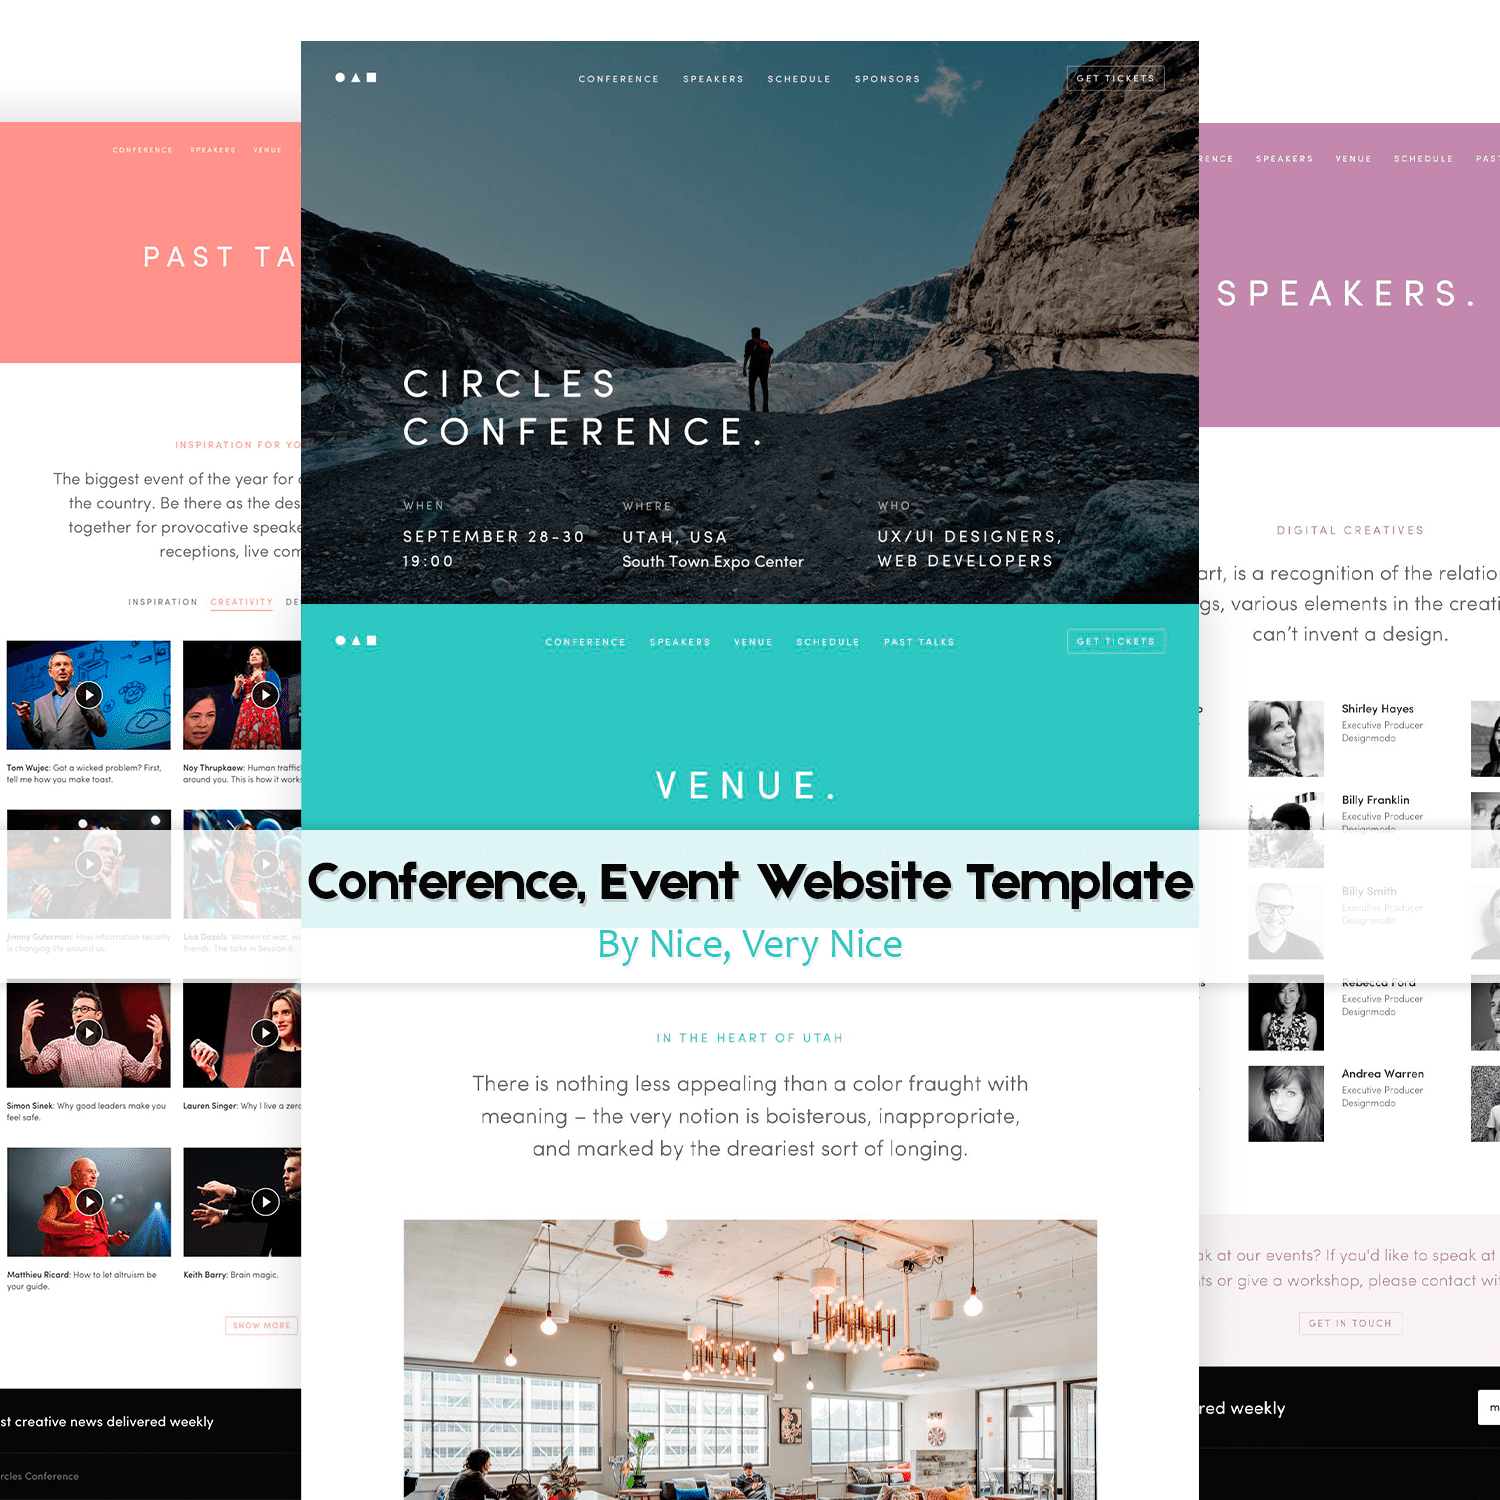 Conference, Event Website Template cover.